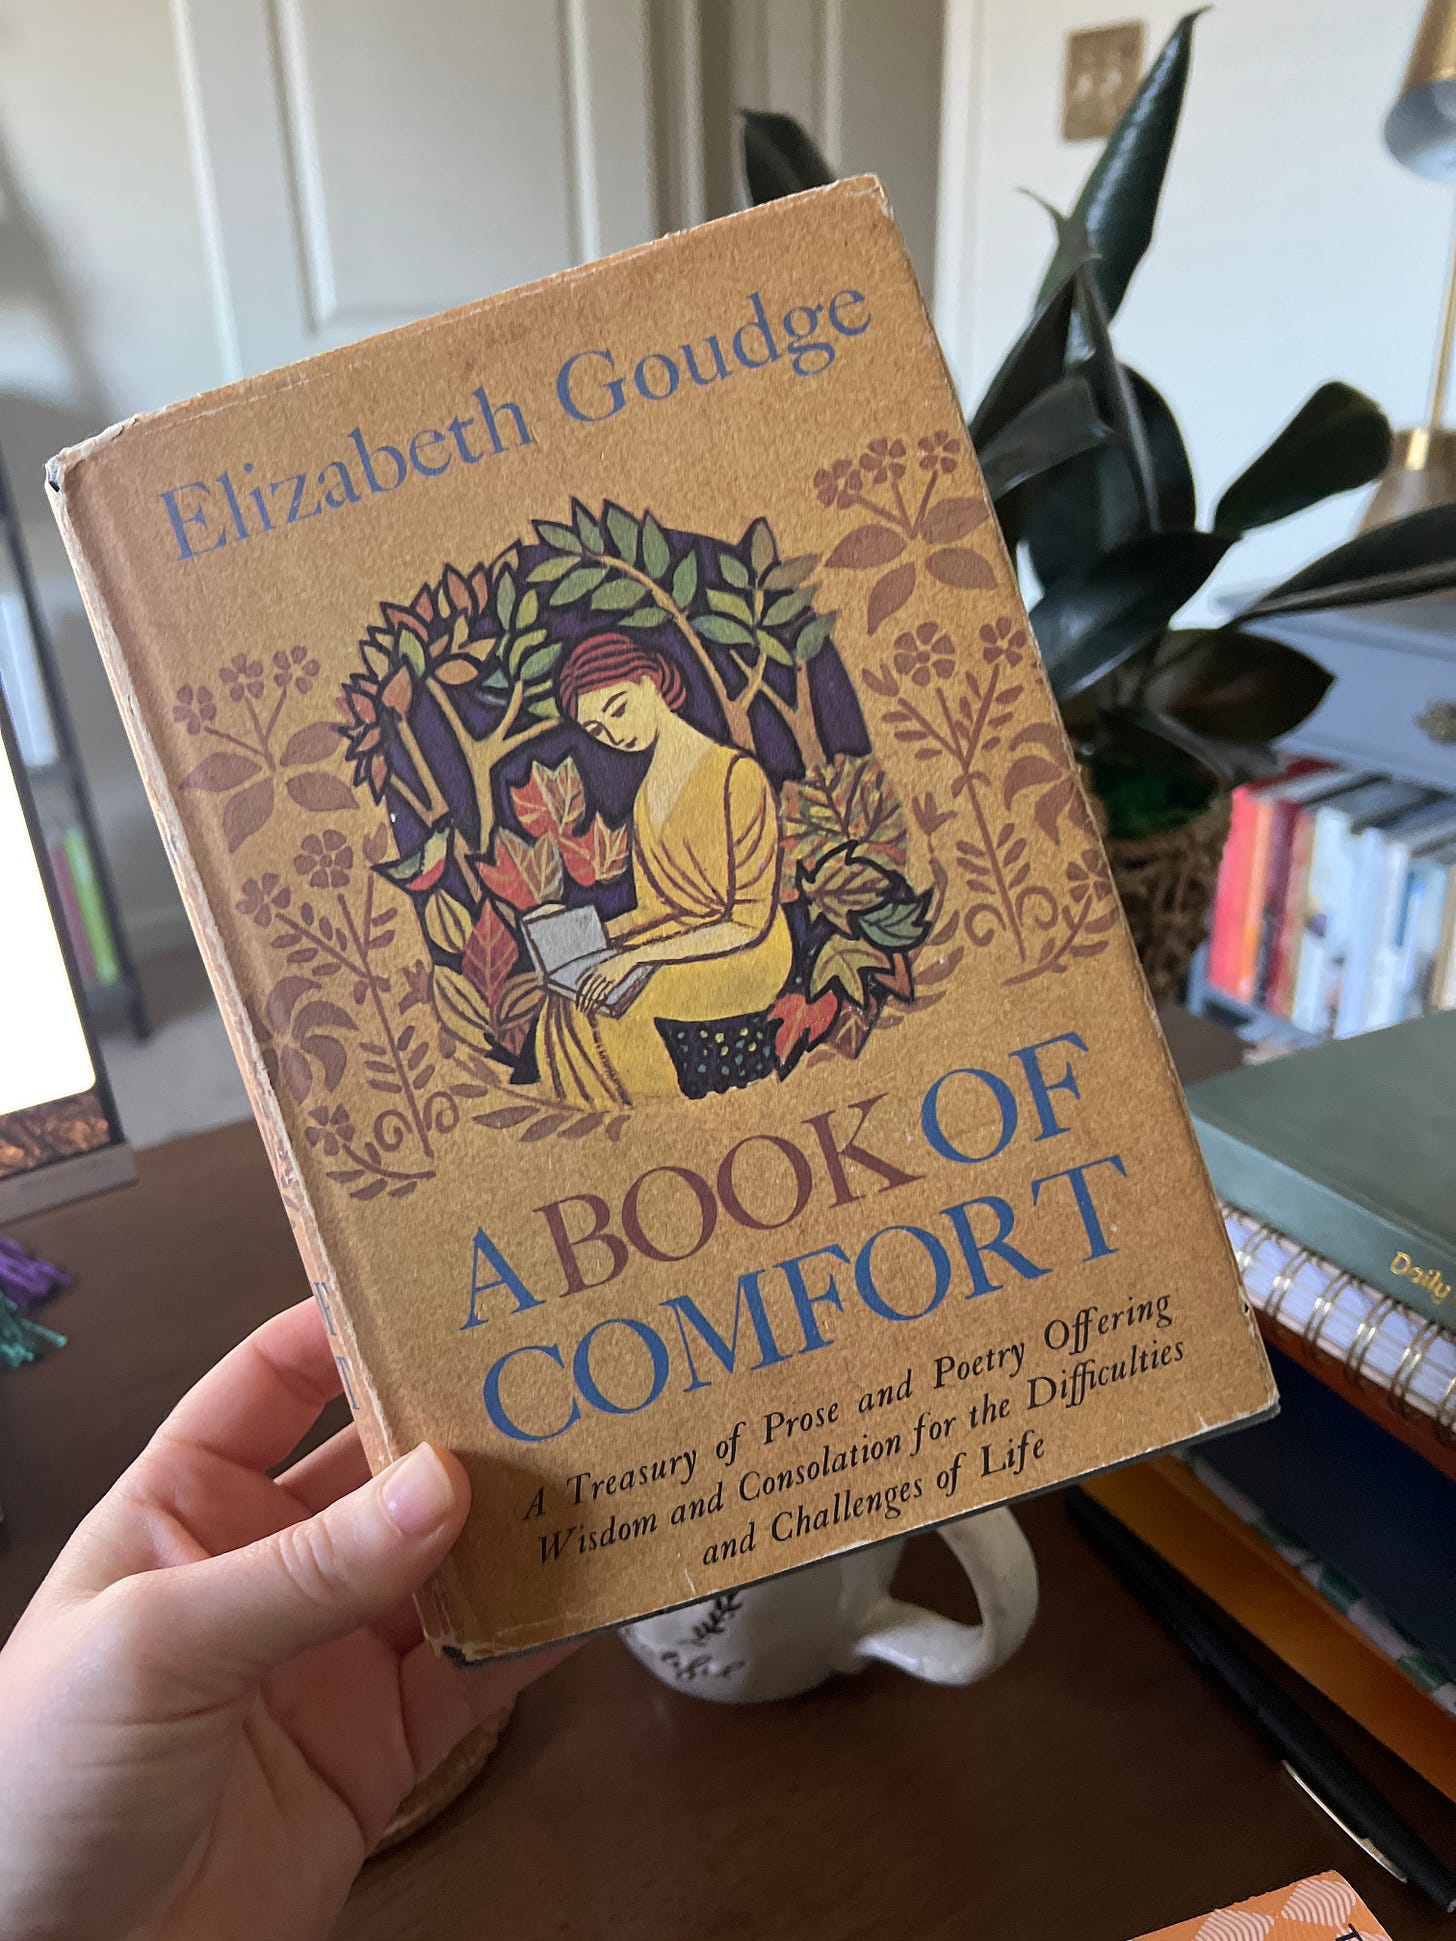 A Book of Comfort by Elizabeth Goudge. Photo by Sarah Vaughn